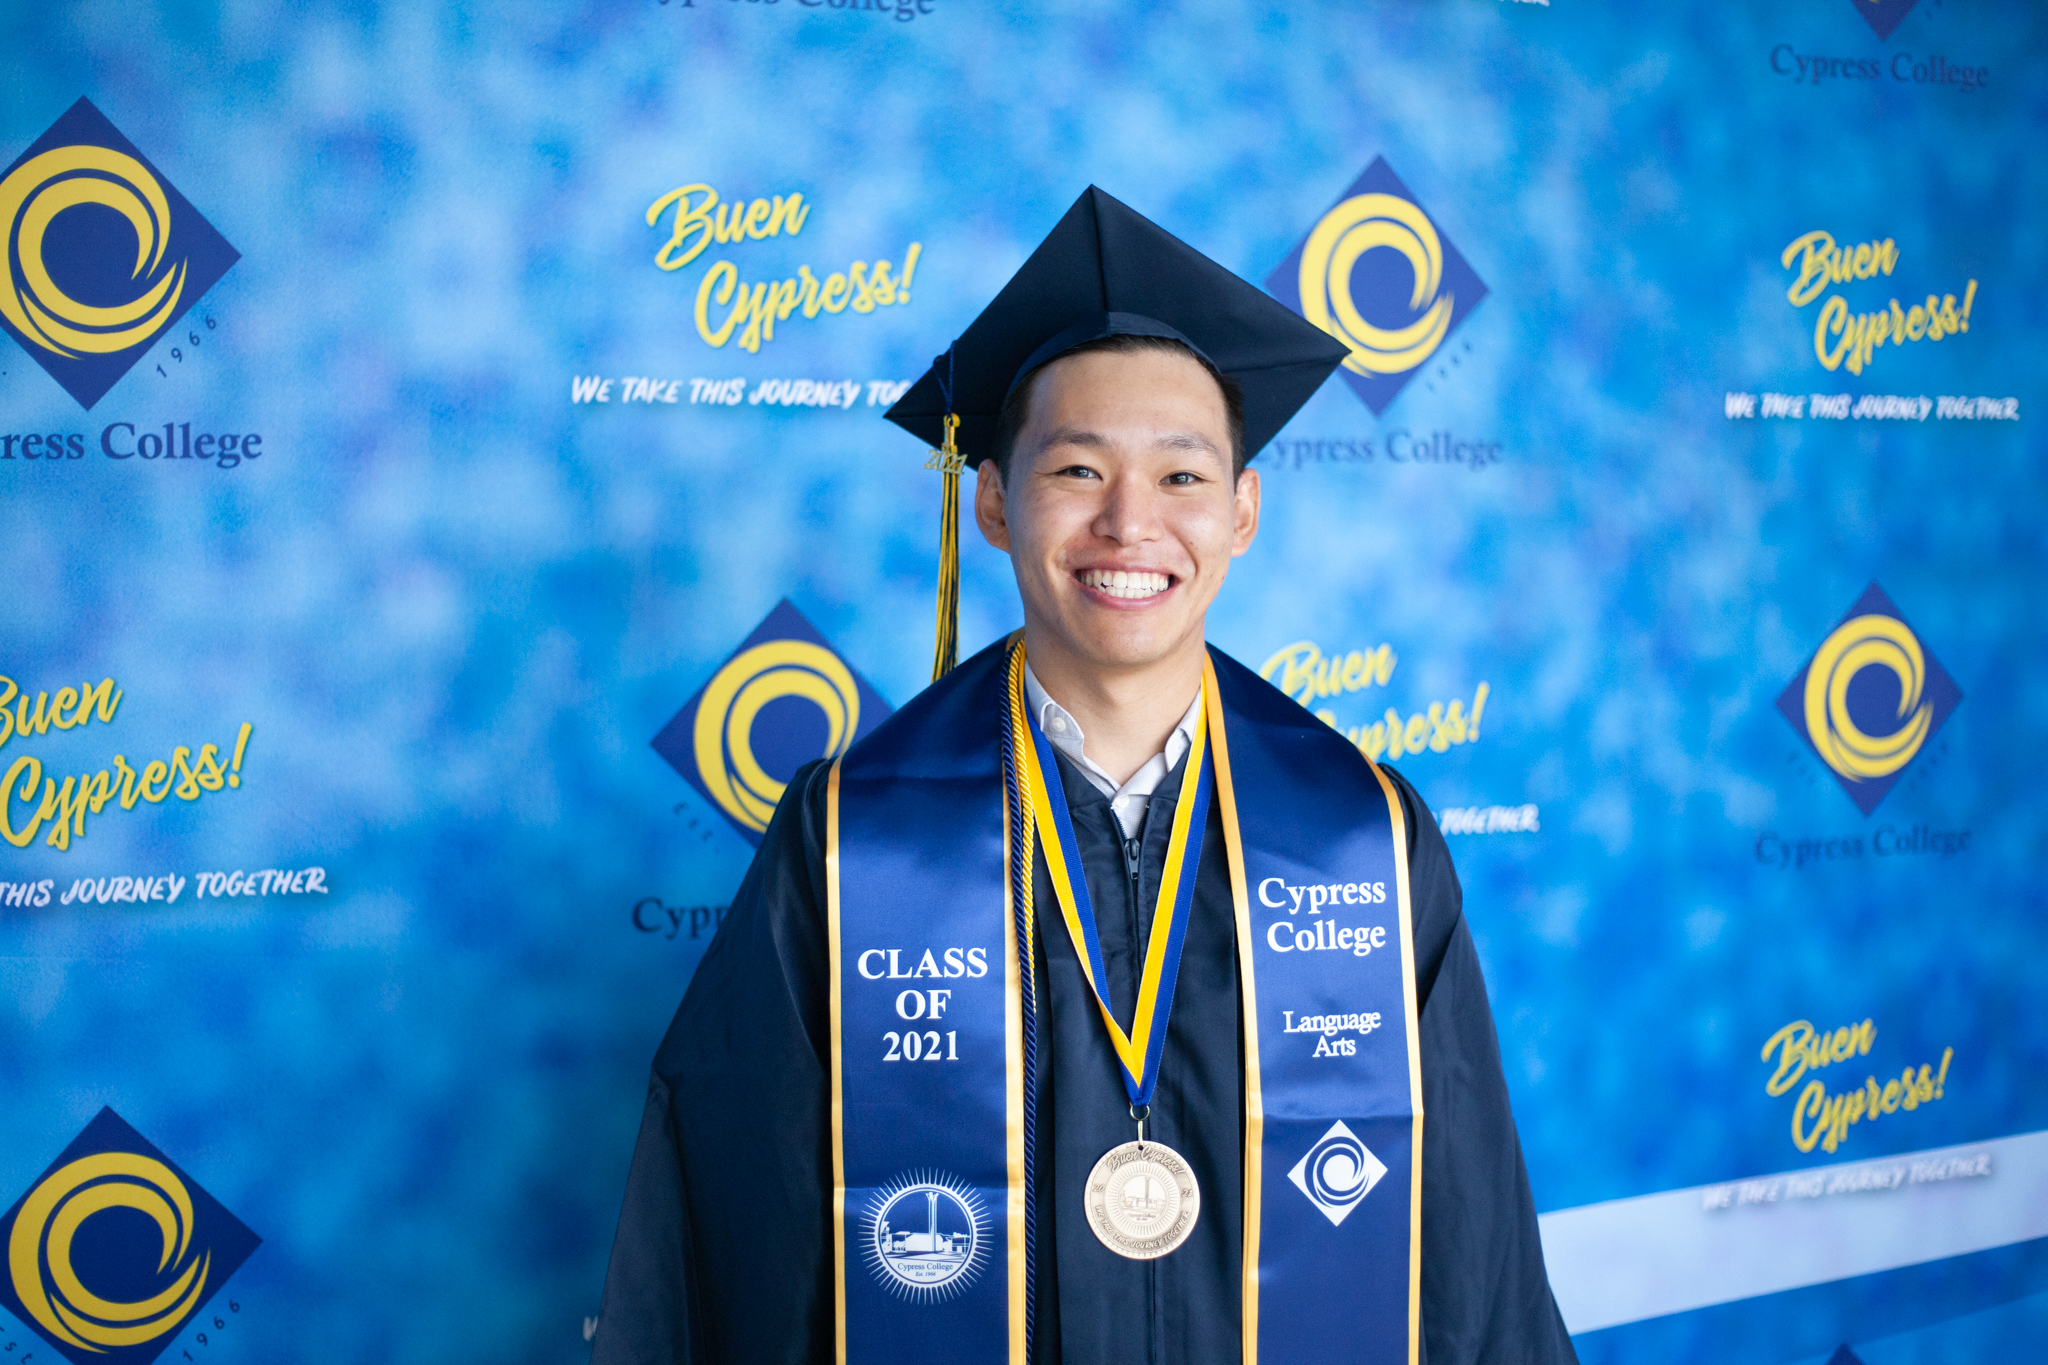 Hiroki Funahashi, Flight Attendant and Communications Studies student, poses in front of blue background.